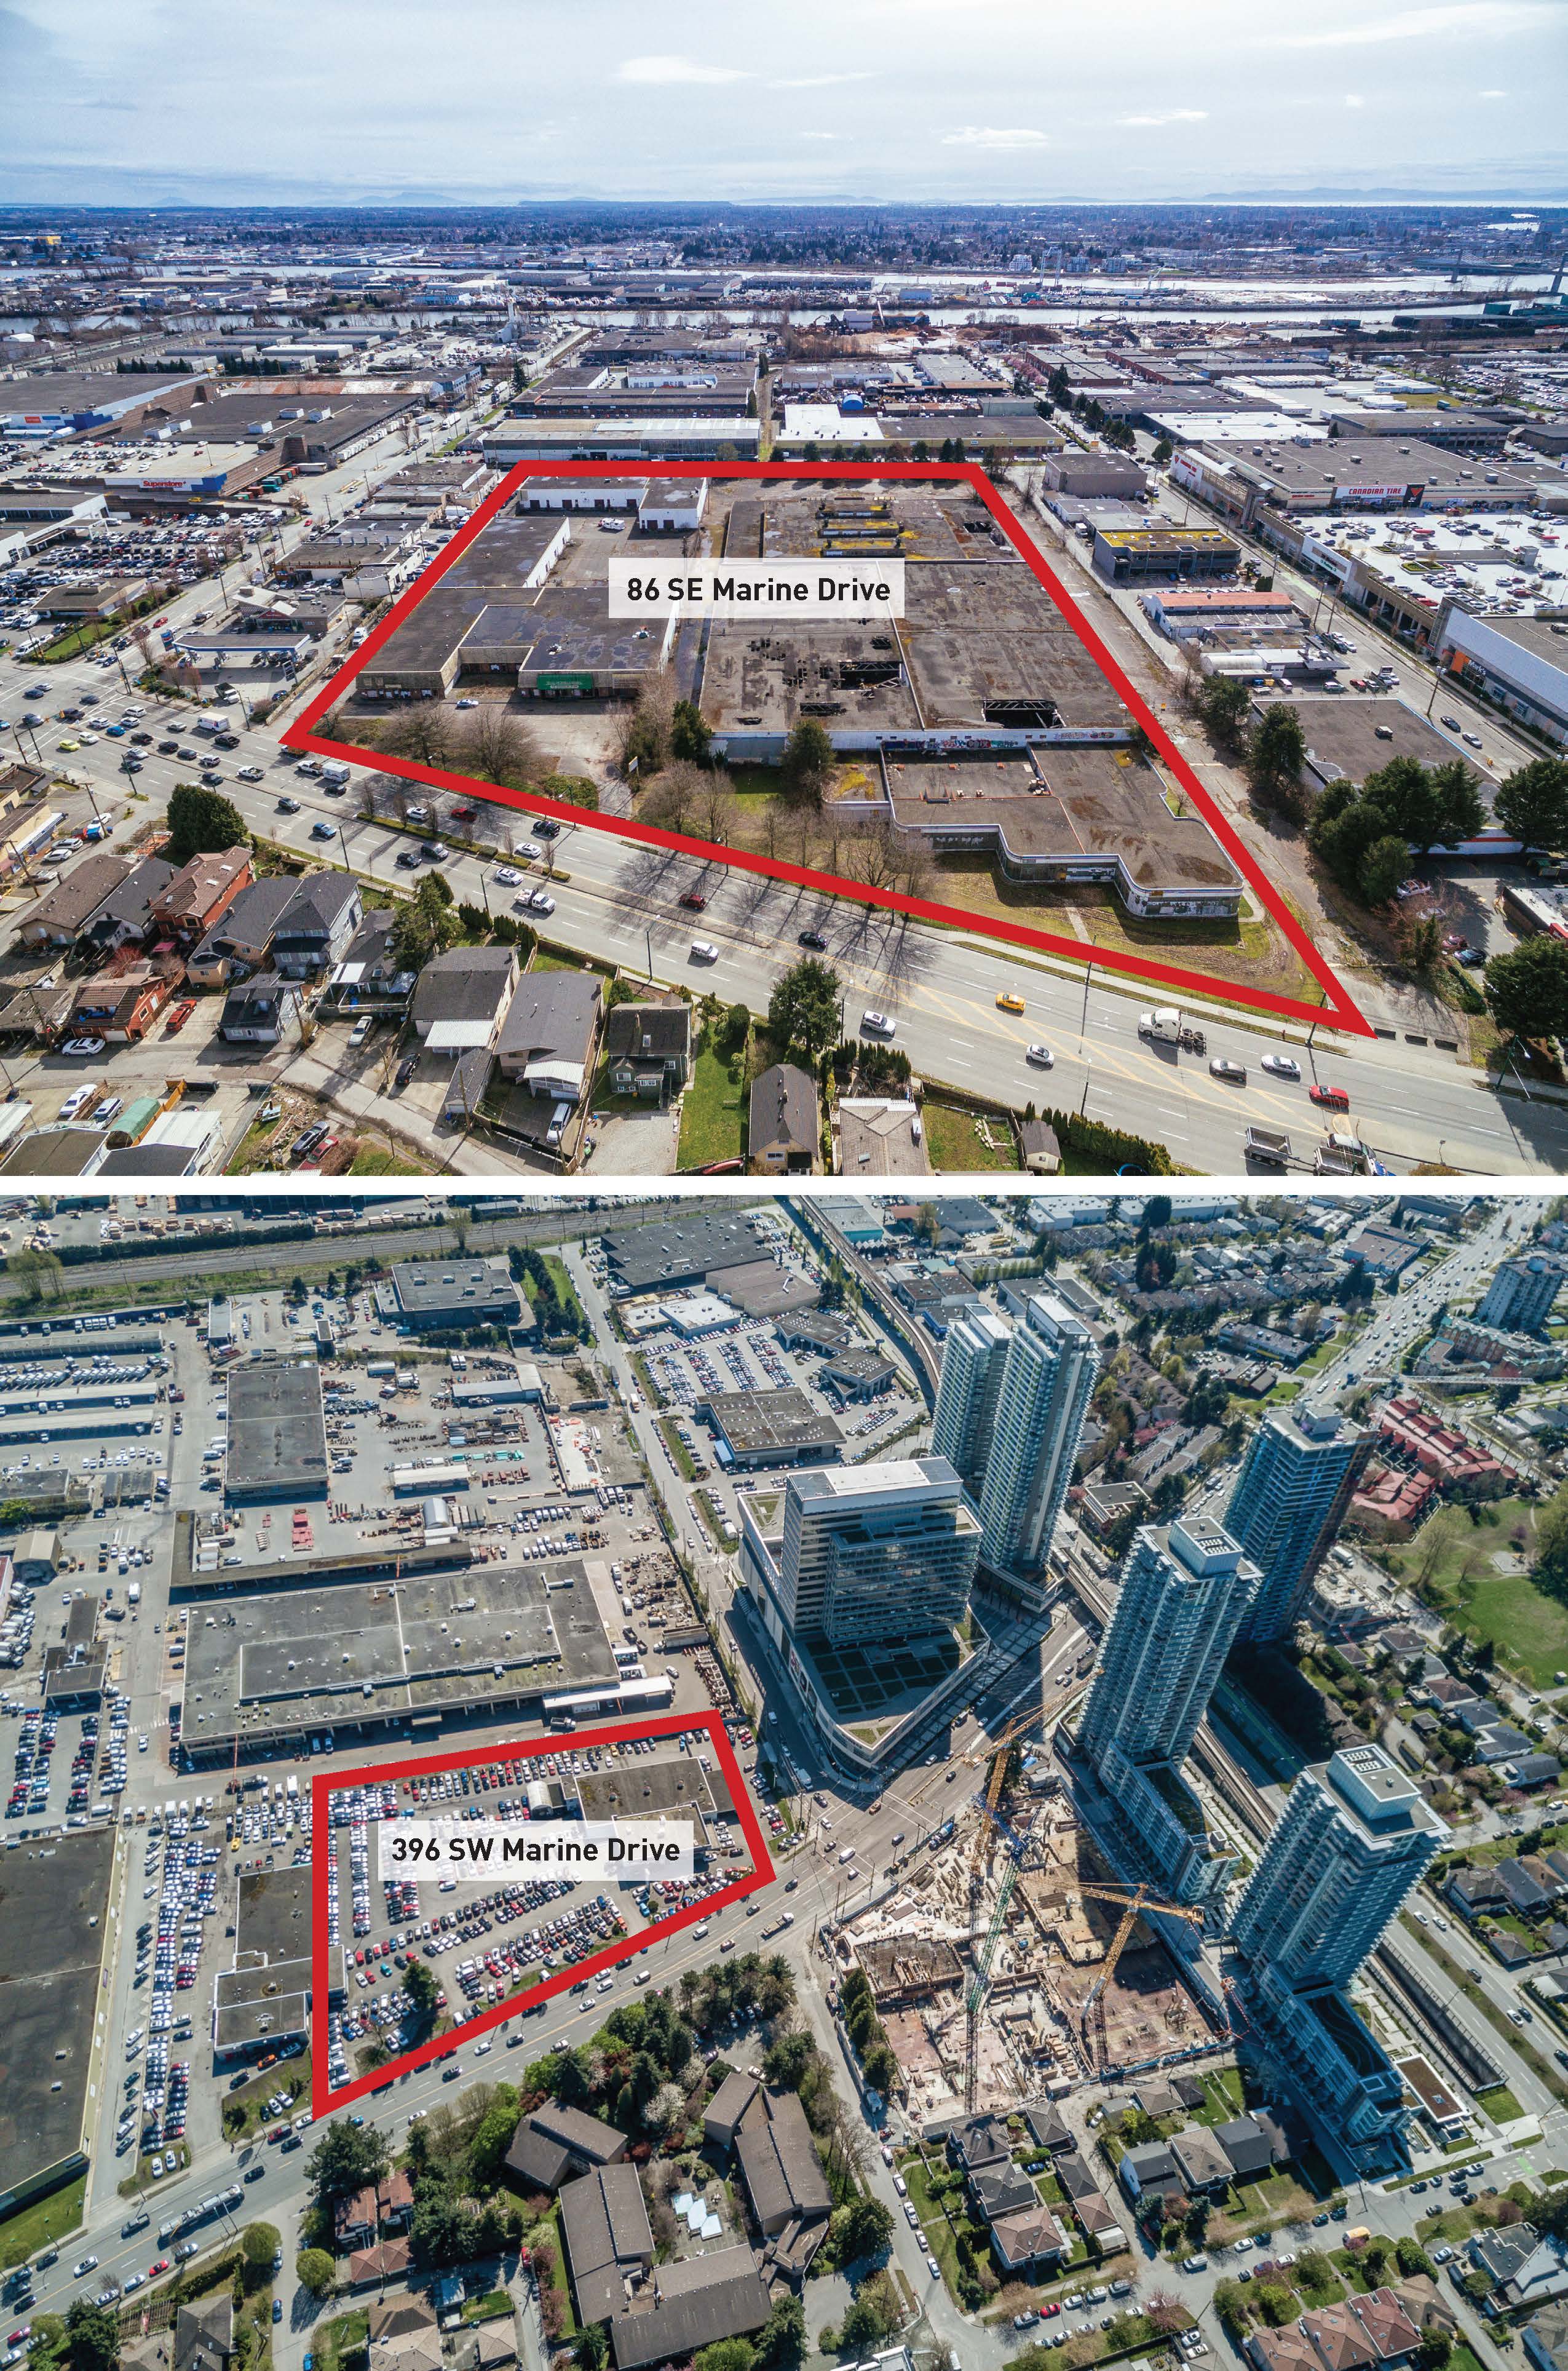 A drone shot of the Walmart site. The top photo shows one of two sites acquired by Hungerford Properties recently in the area and is slated for redevelopment in South Vancouver, while the KIA dealership site next to Marine Gateway Canada Line station is shown at the bottom.